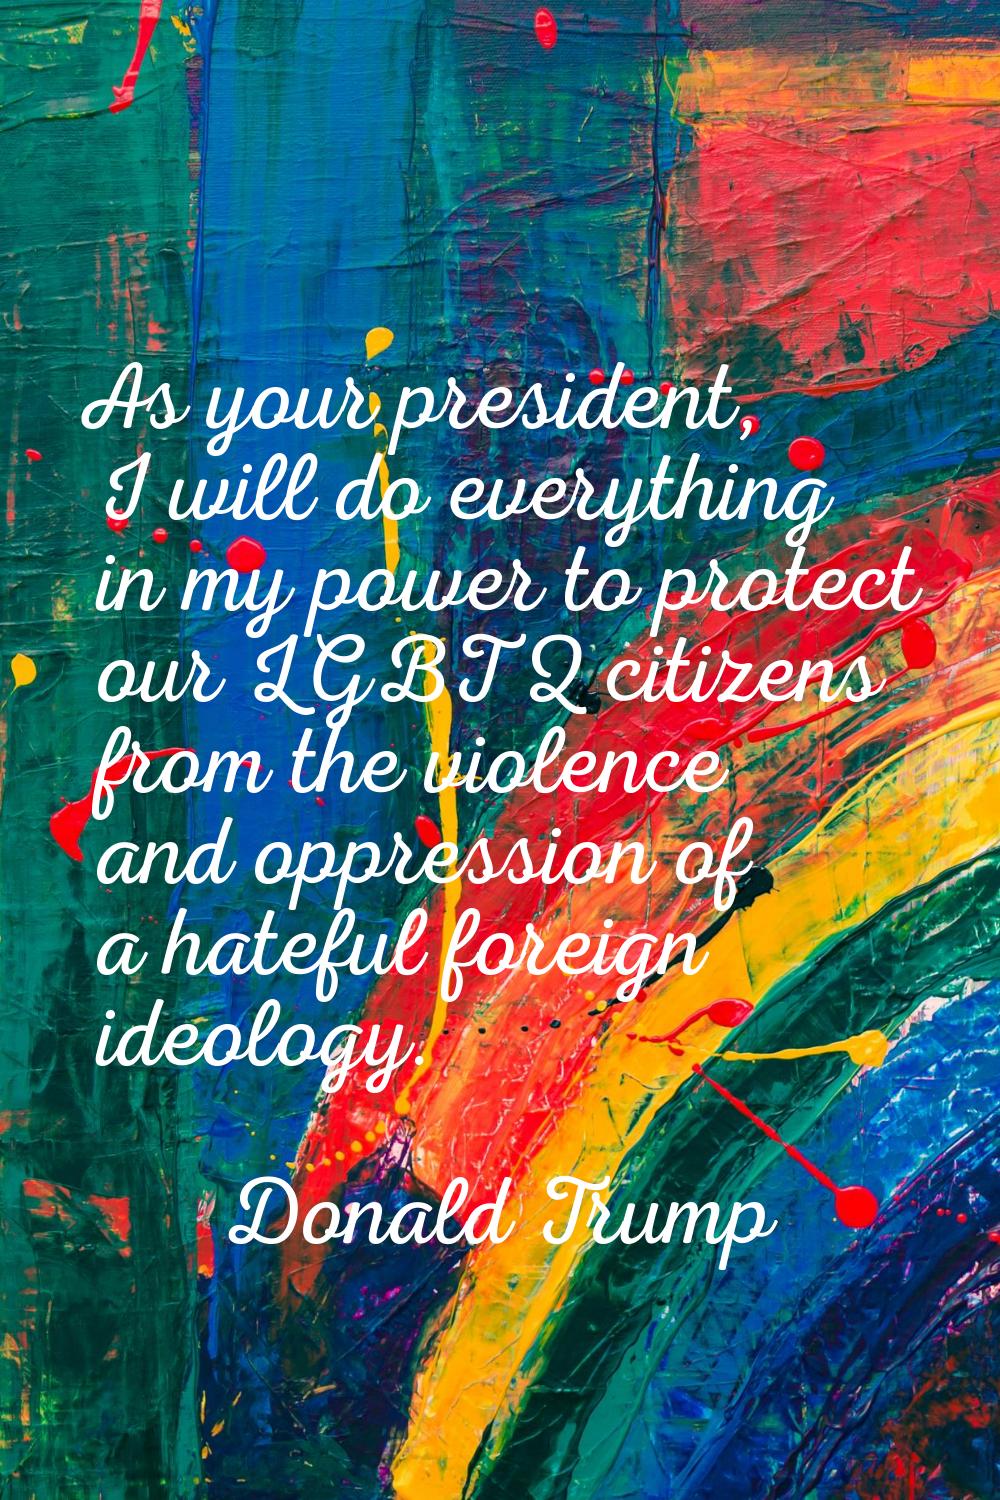 As your president, I will do everything in my power to protect our LGBTQ citizens from the violence